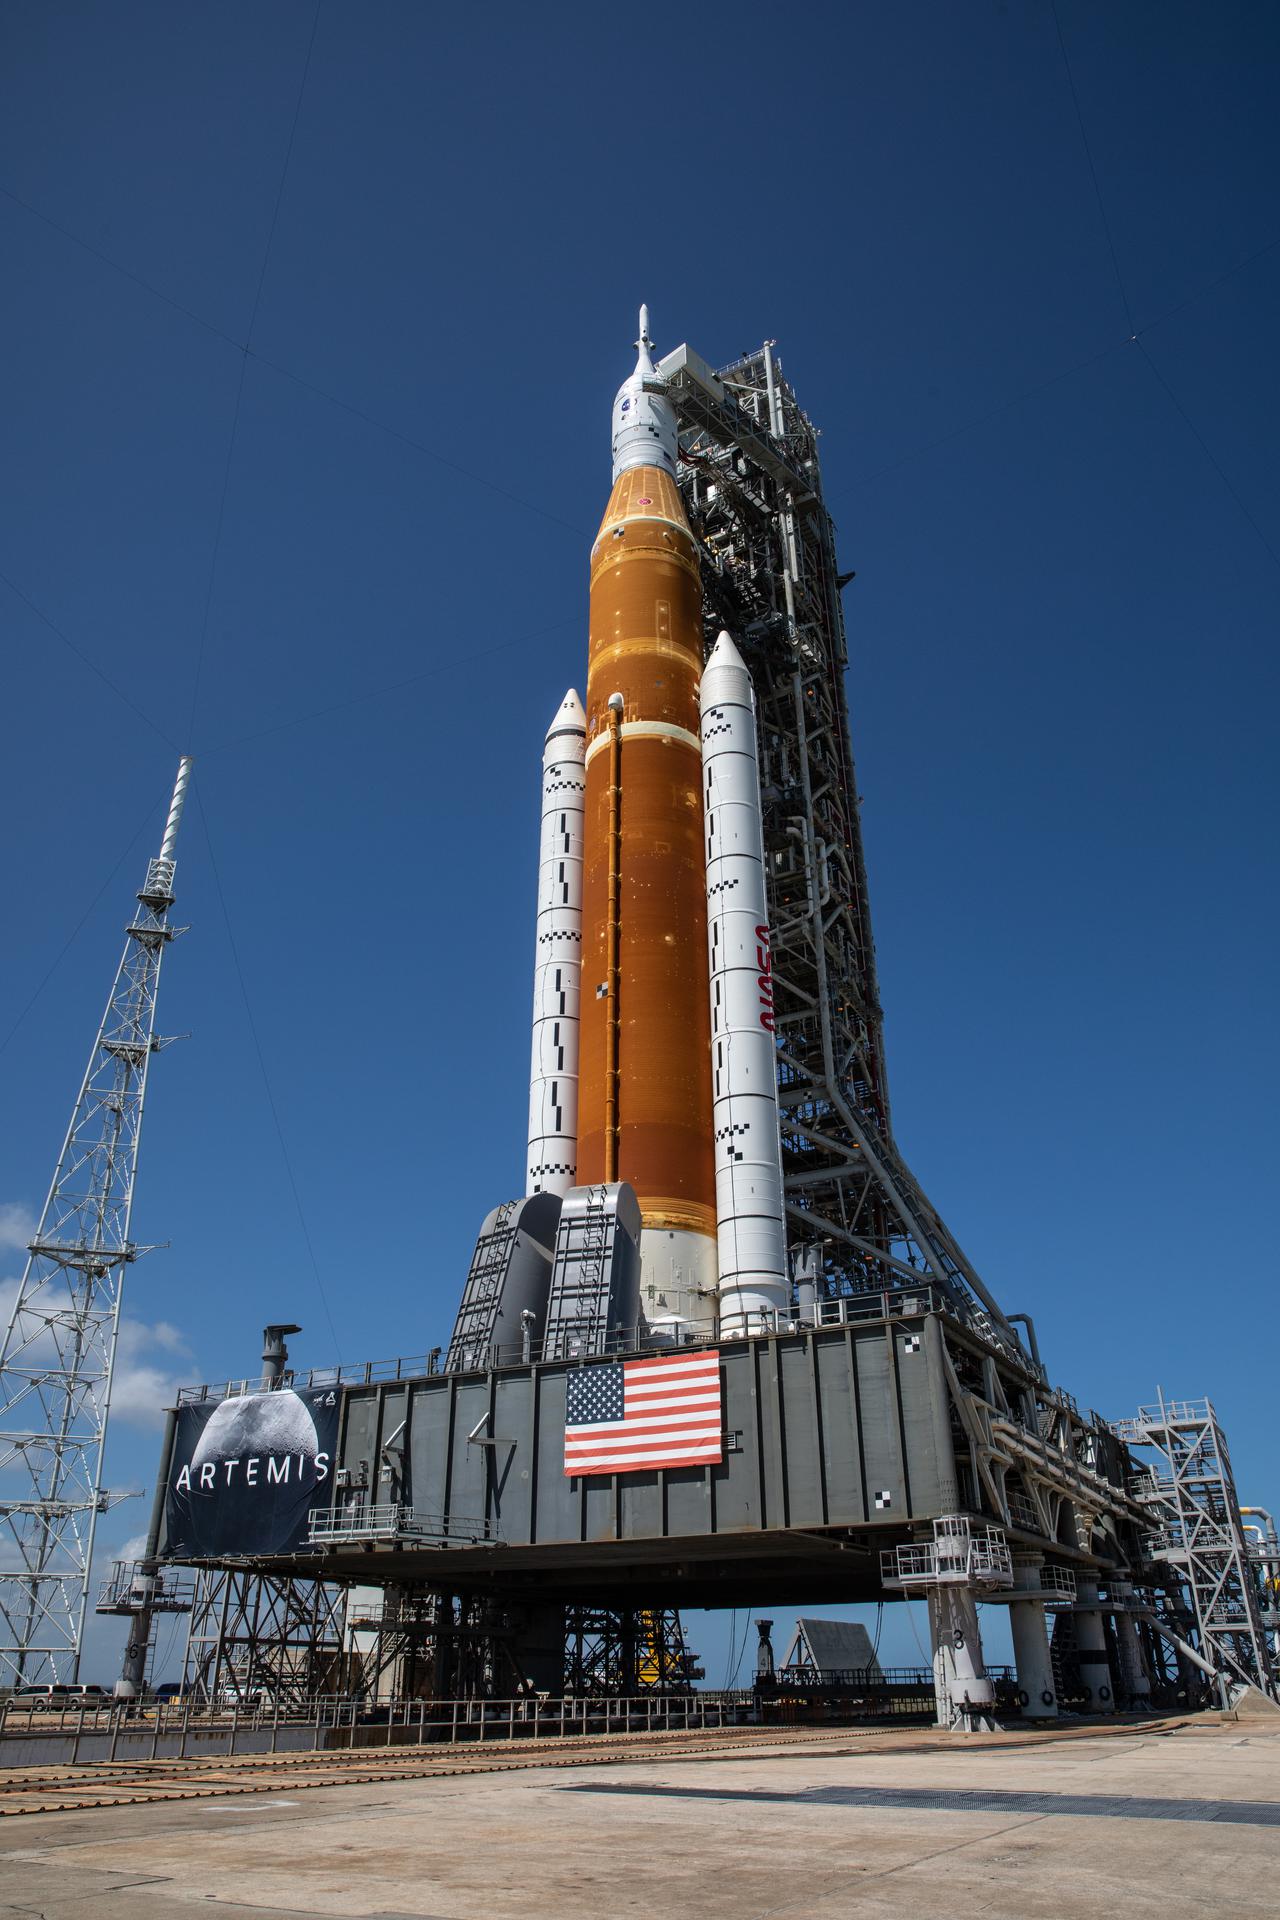 Standing atop the mobile launcher, NASA’s Space Launch System (SLS) rocket is photographed at Launch Pad 39B at the agency’s Kennedy Space Center in Florida on March 18, 2022.